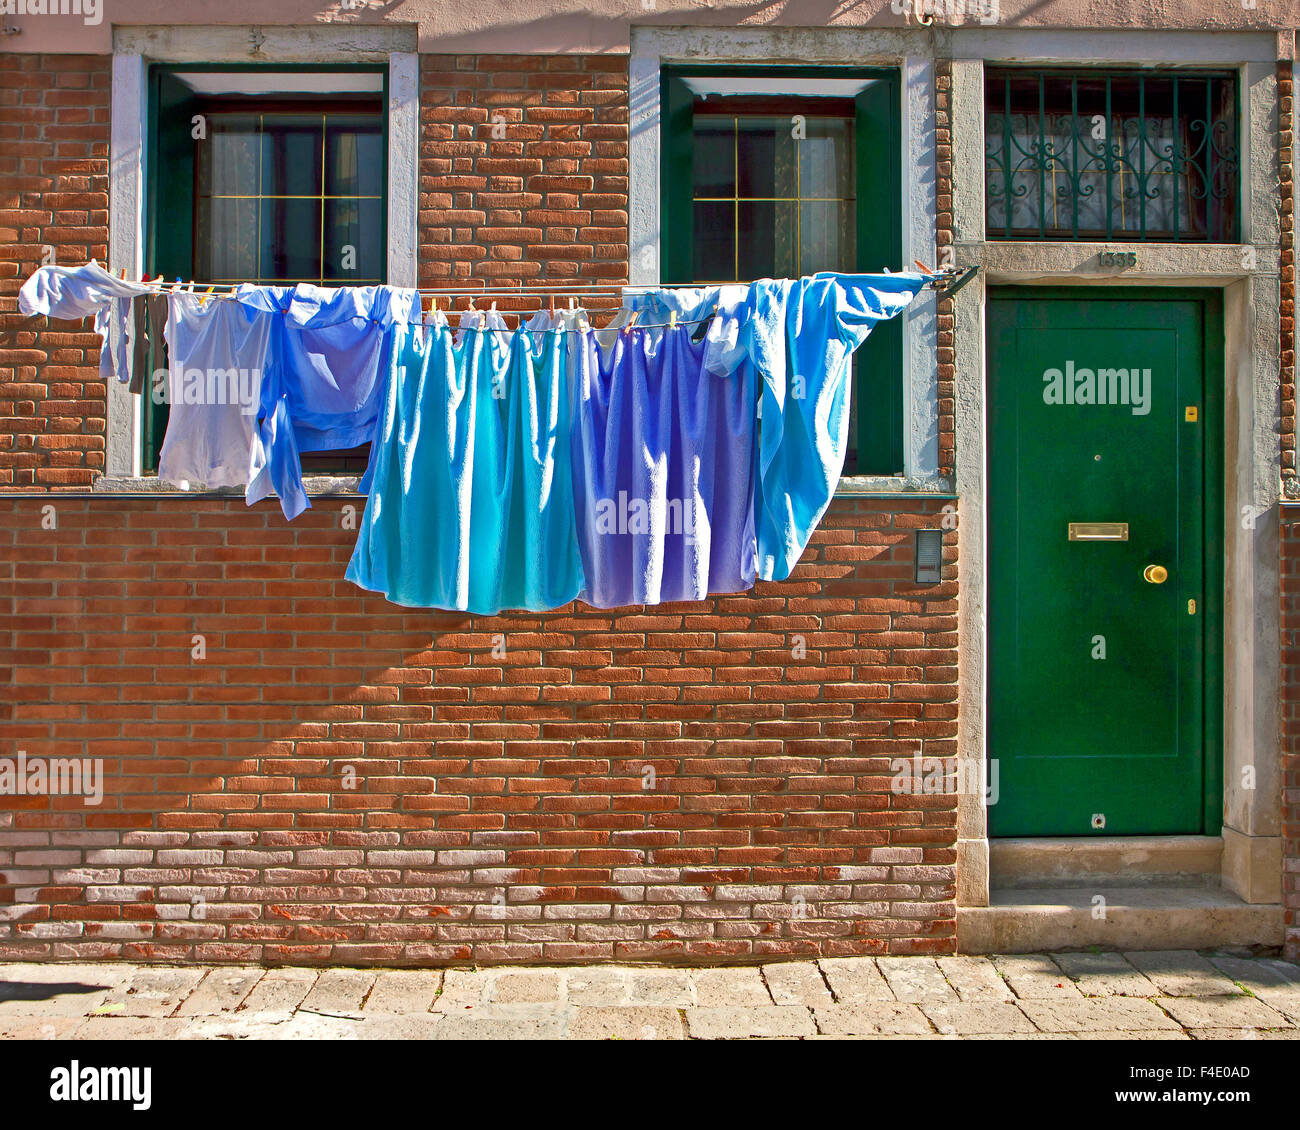 Venice, Italy - Laundry hanging on the clothesline in front of the ...